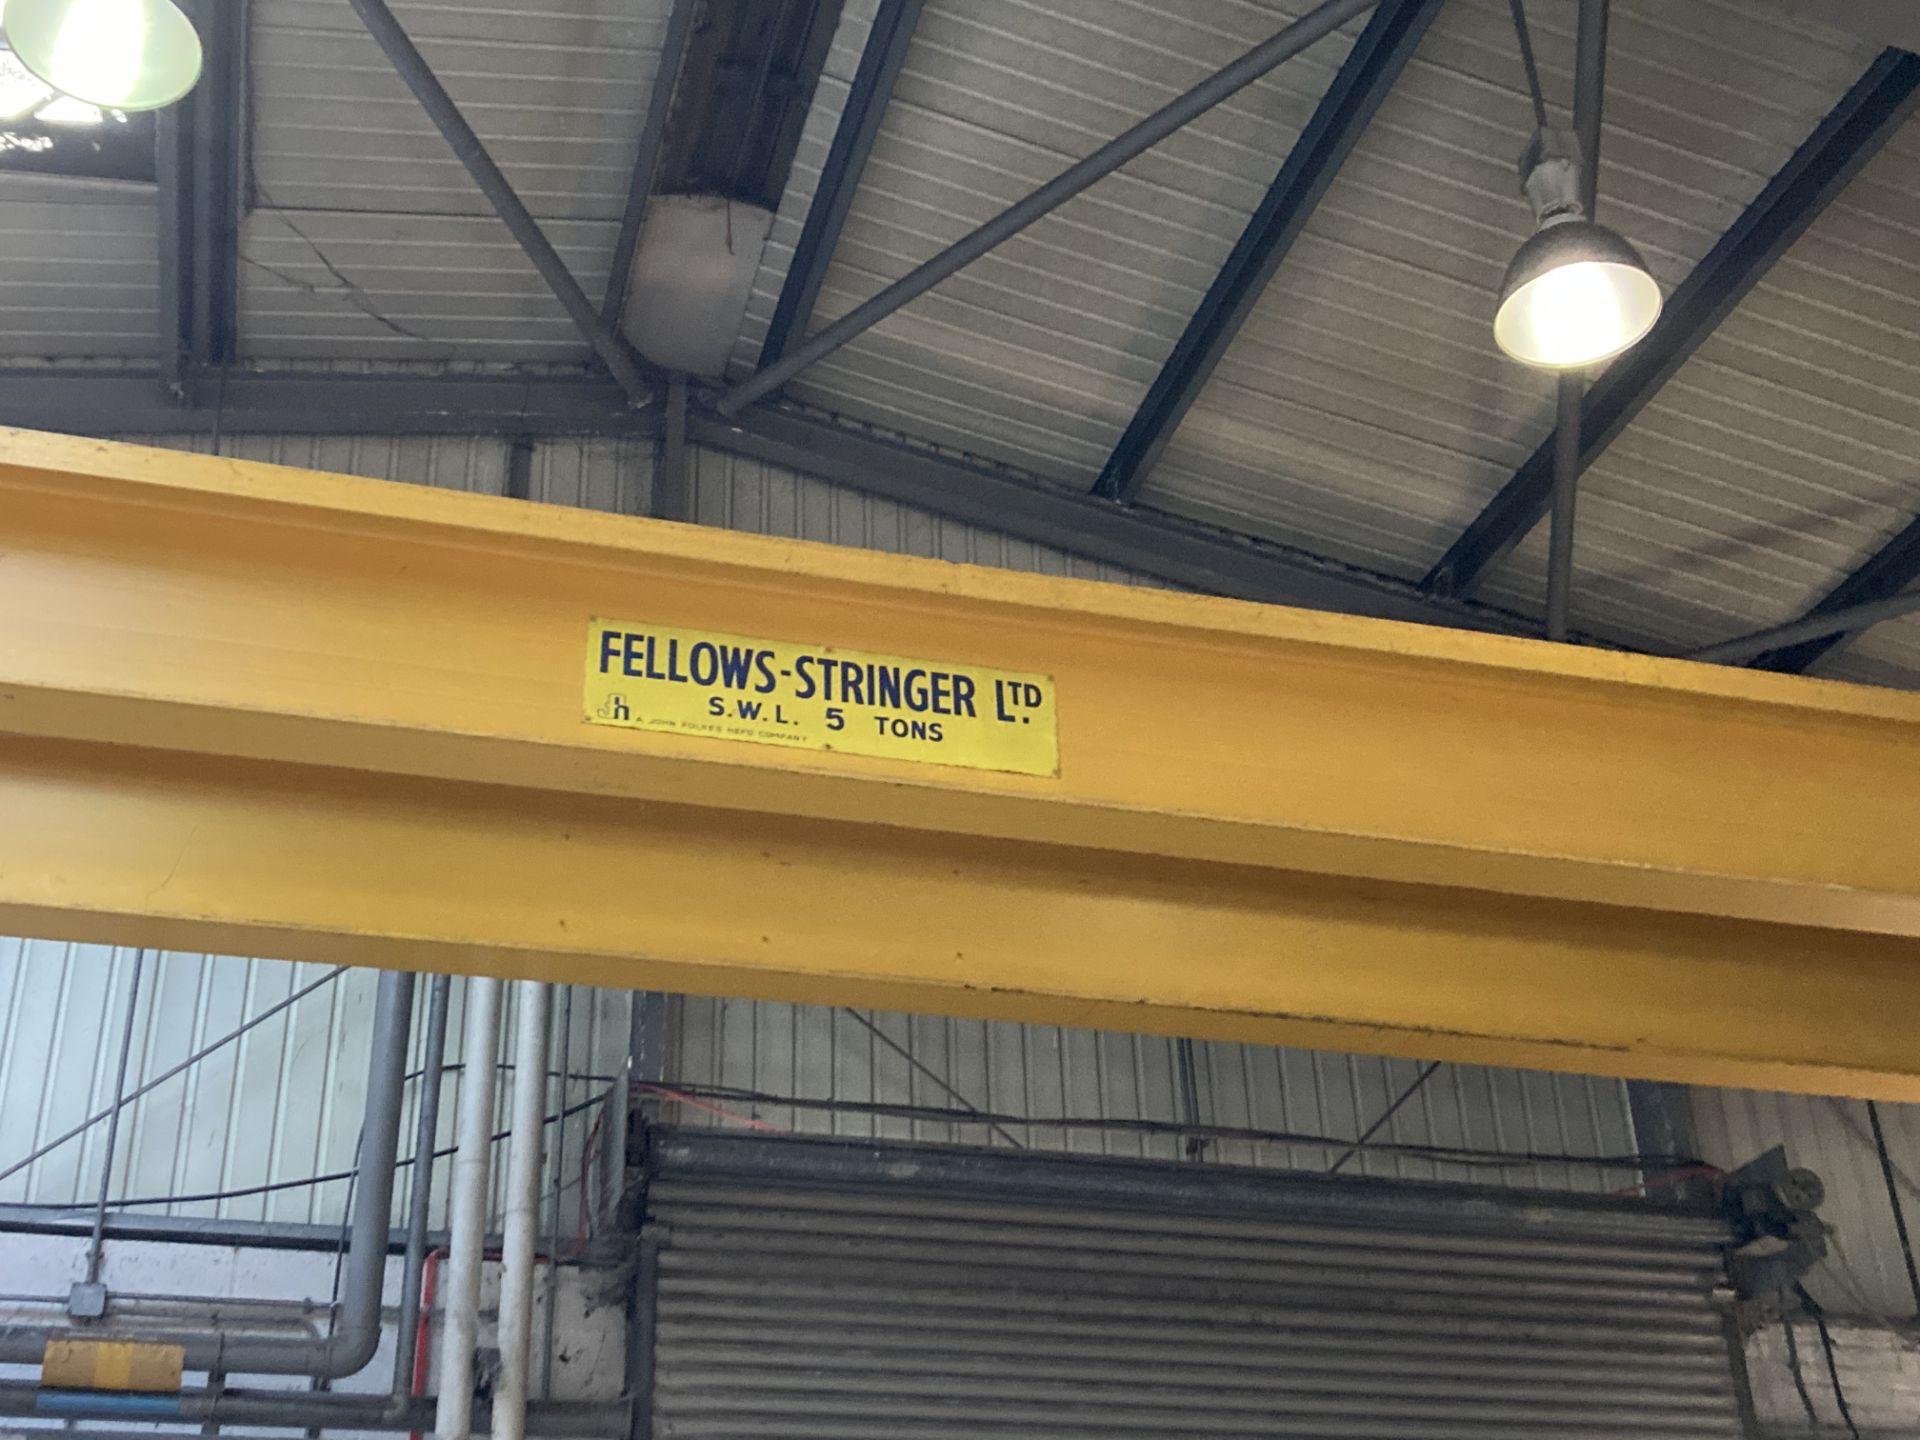 Fellows-Stringer 5 TON TWIN GIRDER OVERHEAD TRAVELLING CRANE, approx. width of crane – 19.11m x - Image 7 of 9